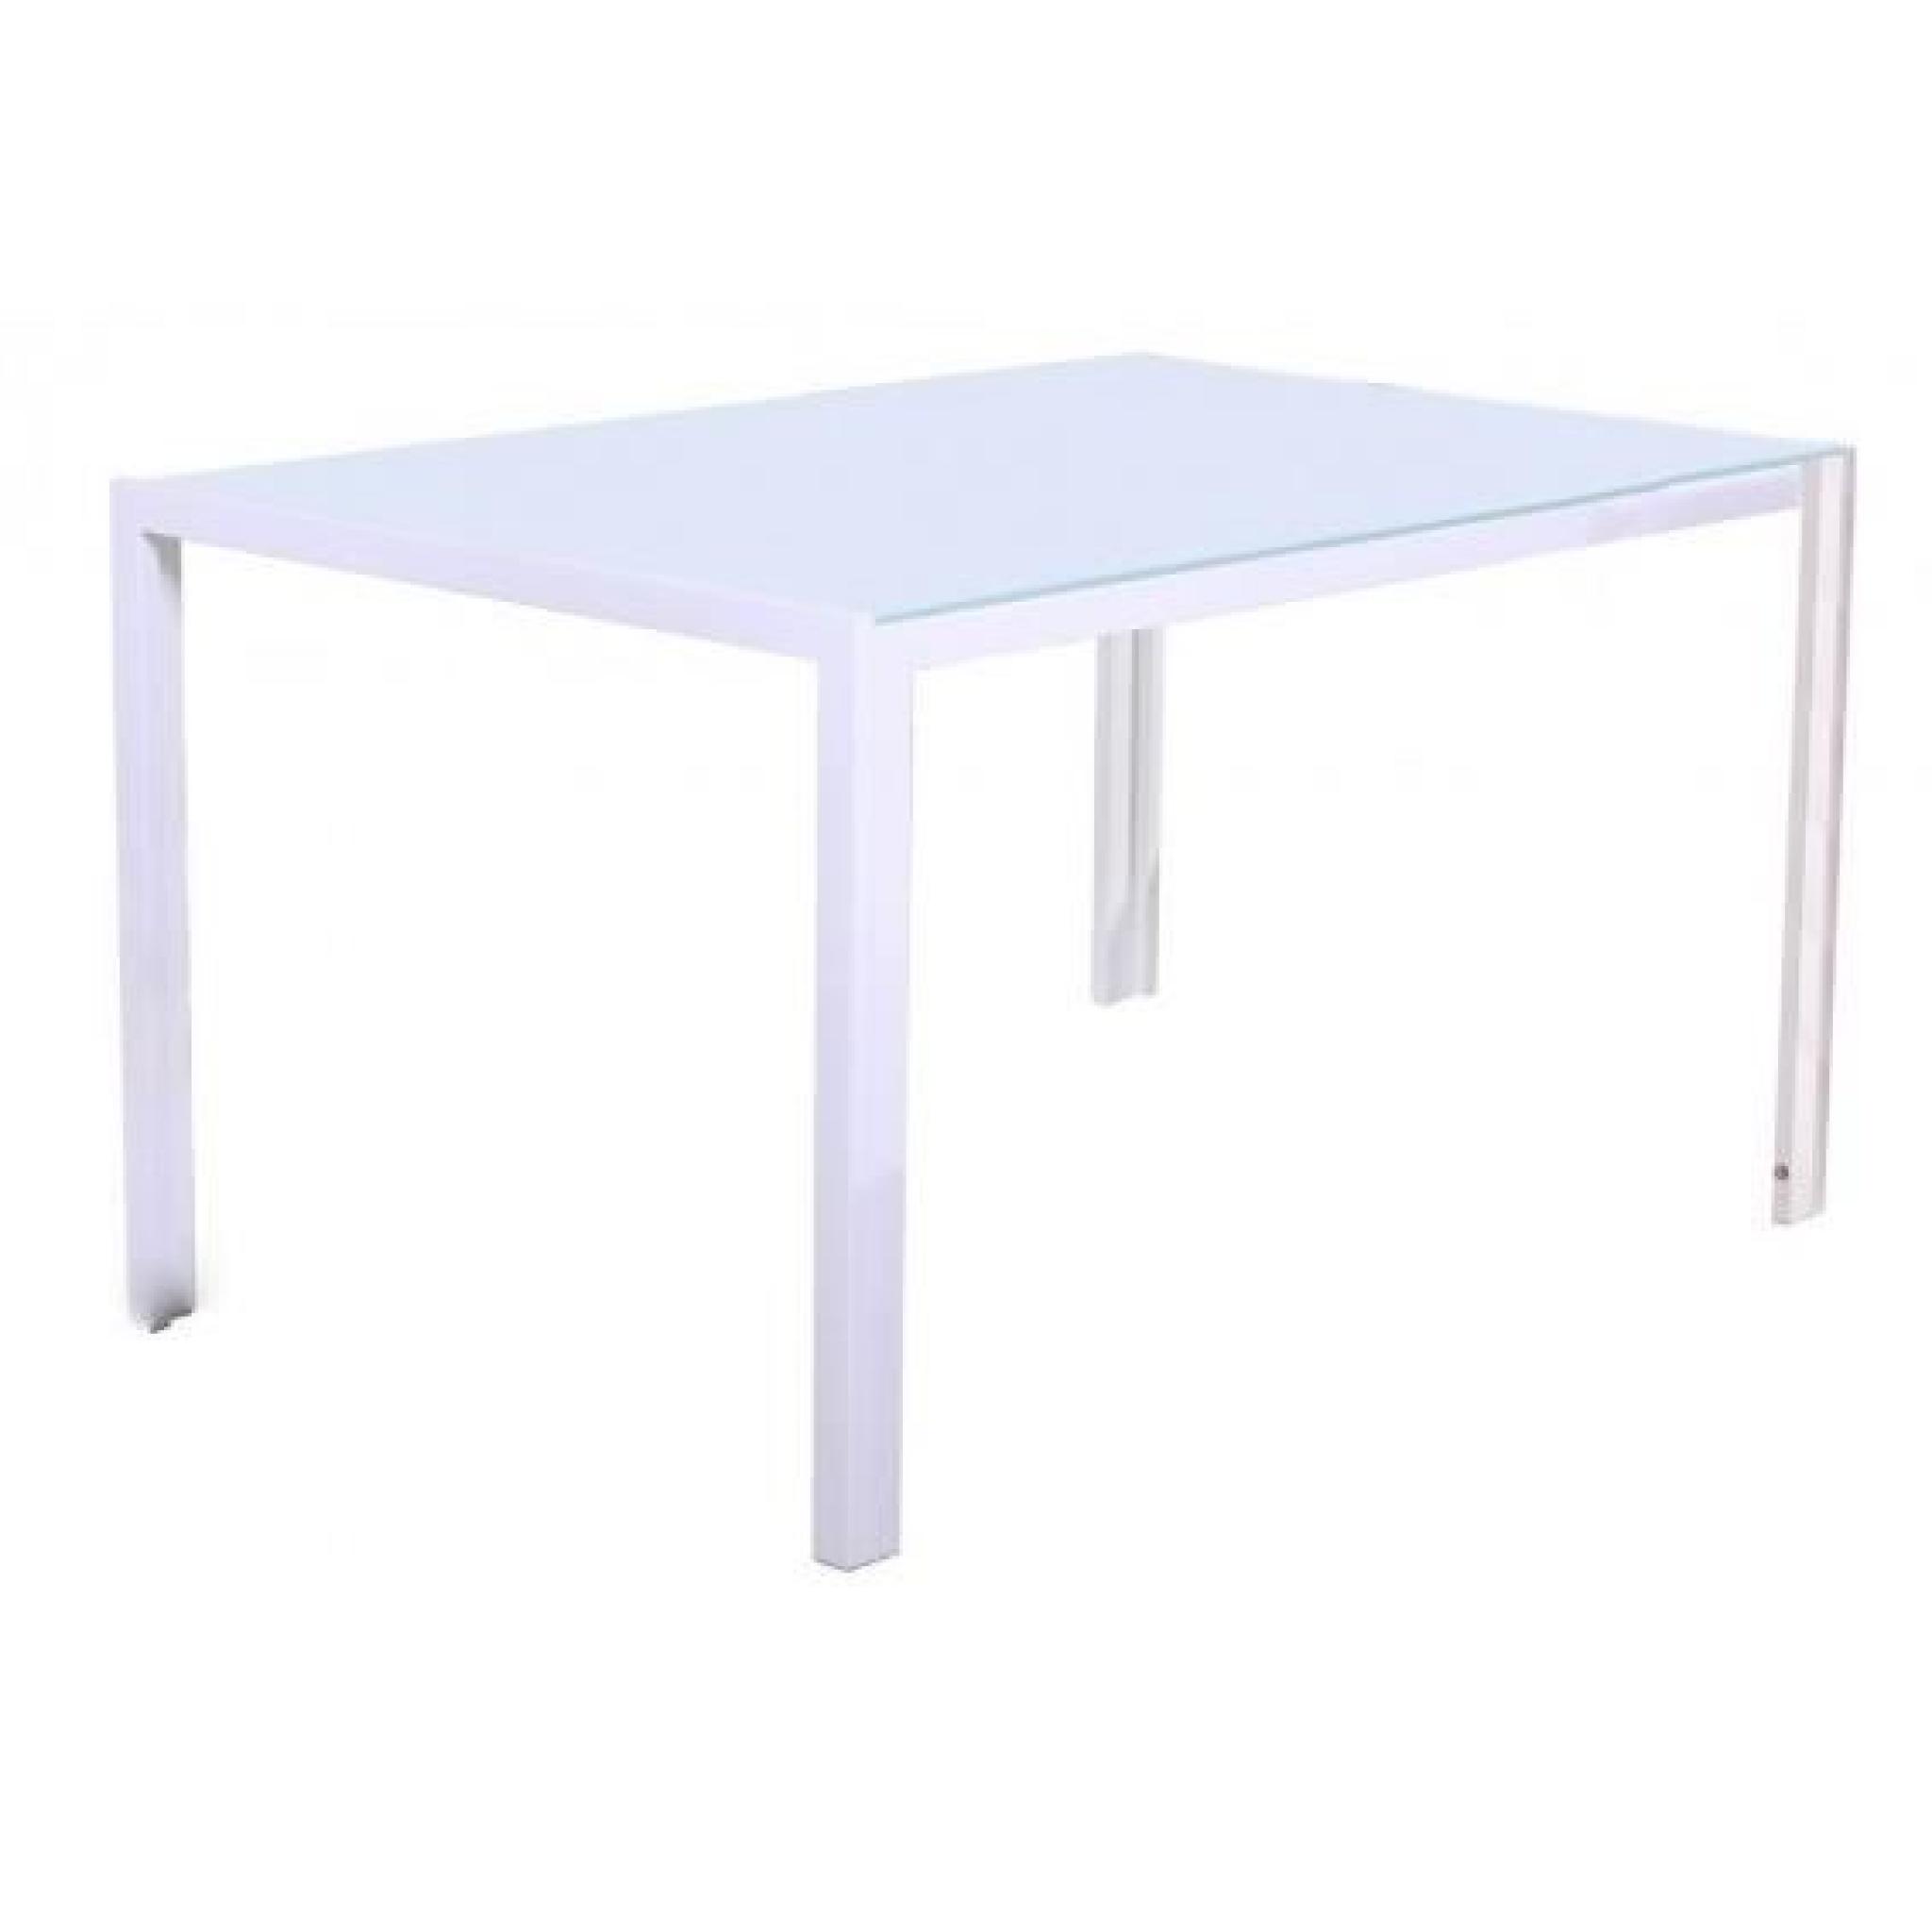 June - Table Rectangulaire Blanche